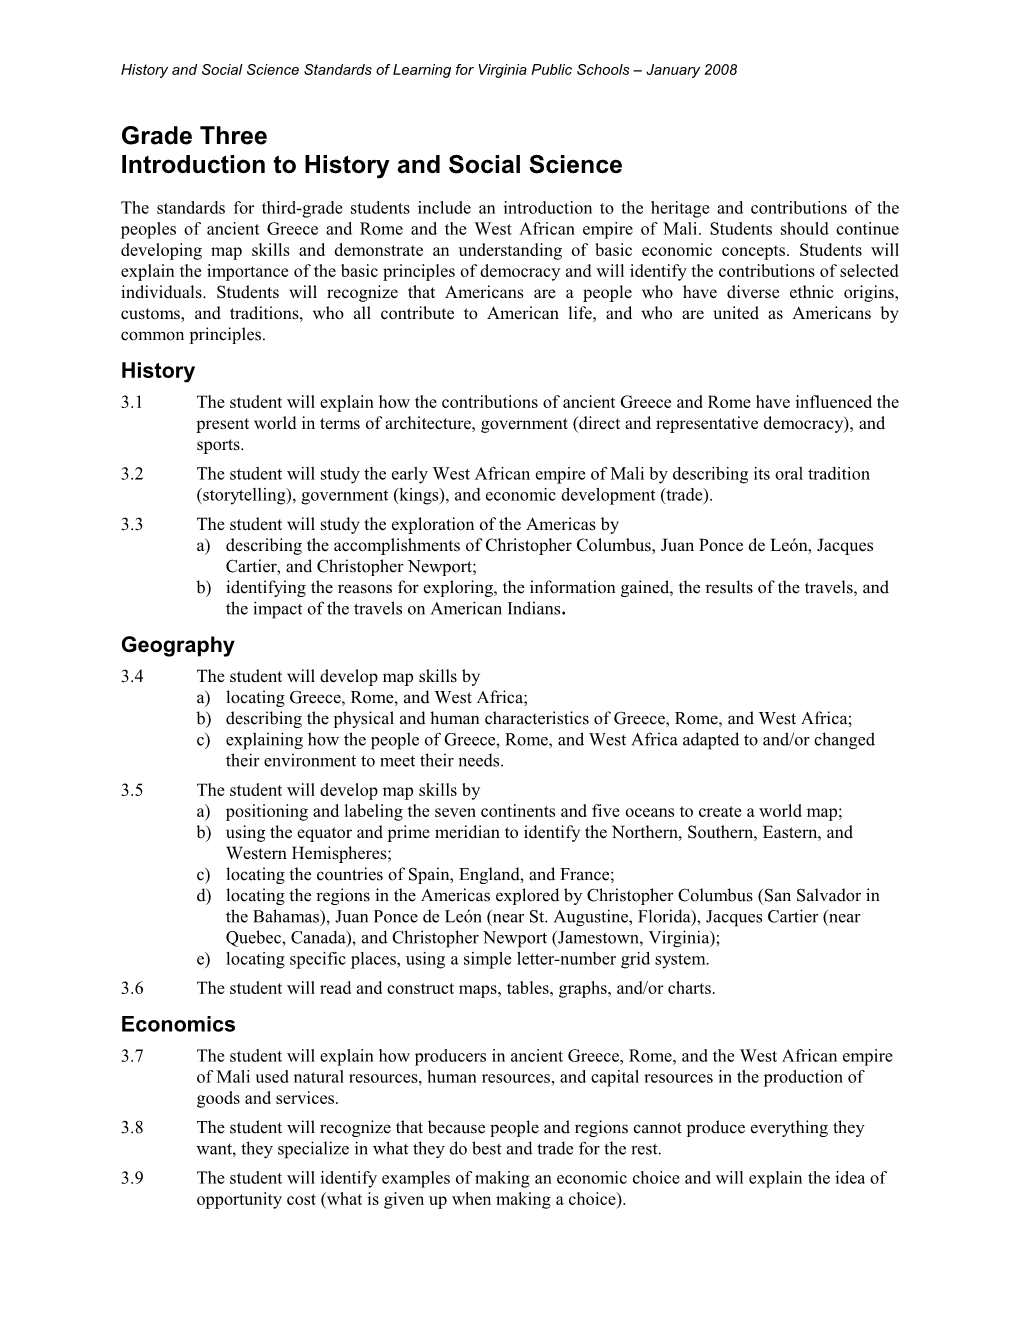 Introduction to History and Social Science